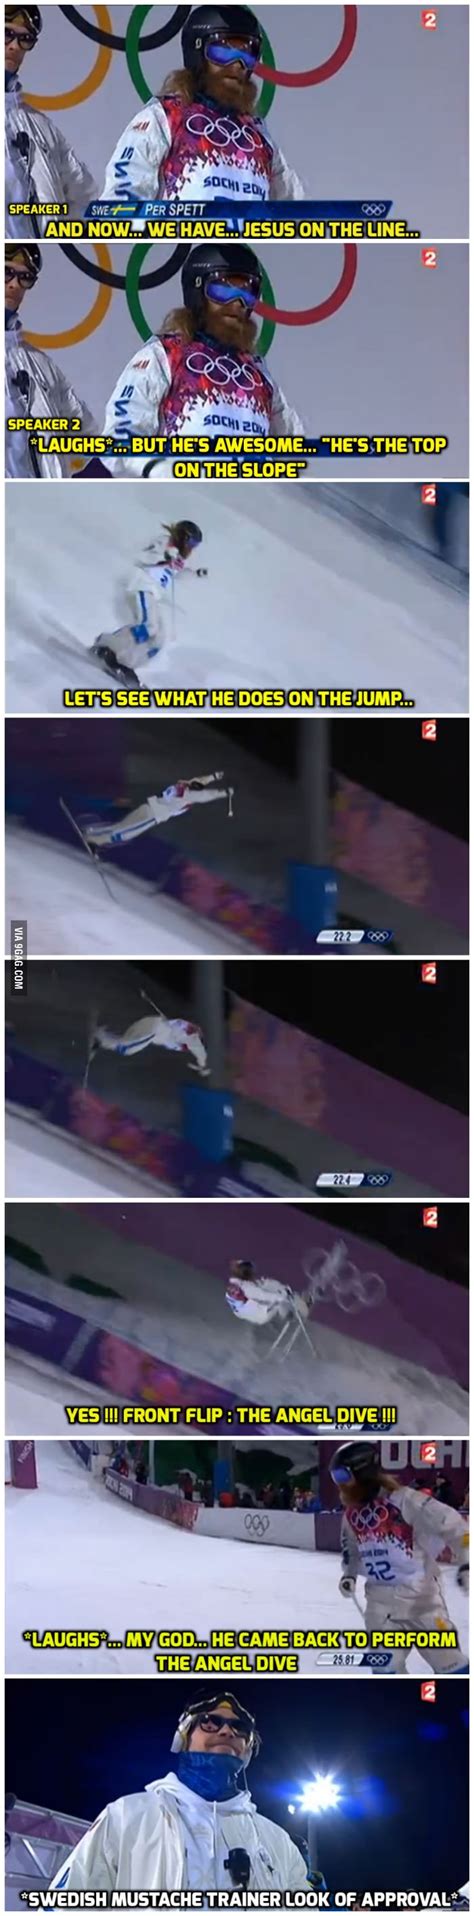 One Of The Funniest Moments Of Sochi Meme Pictures Funny Photos Funny